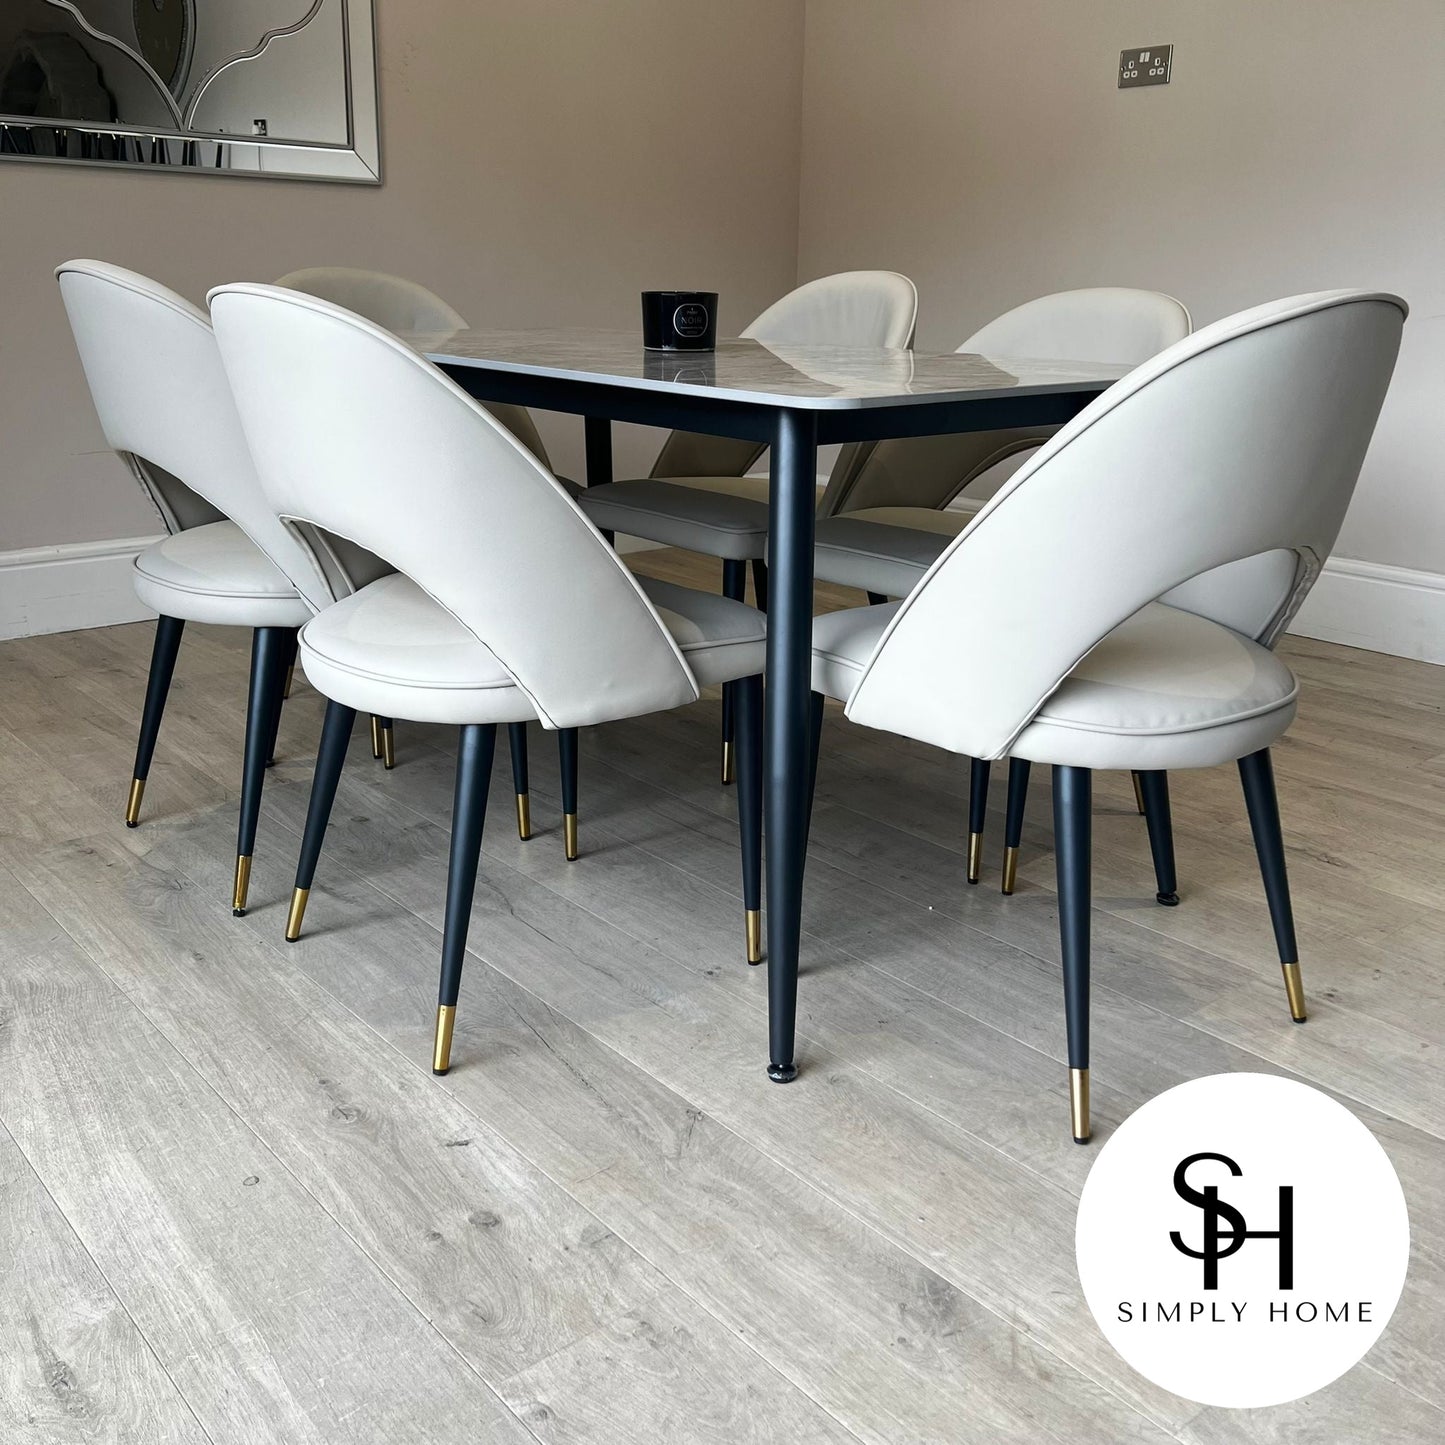 Terra Grey Marble Dining Table with Grey Adrianna Chairs